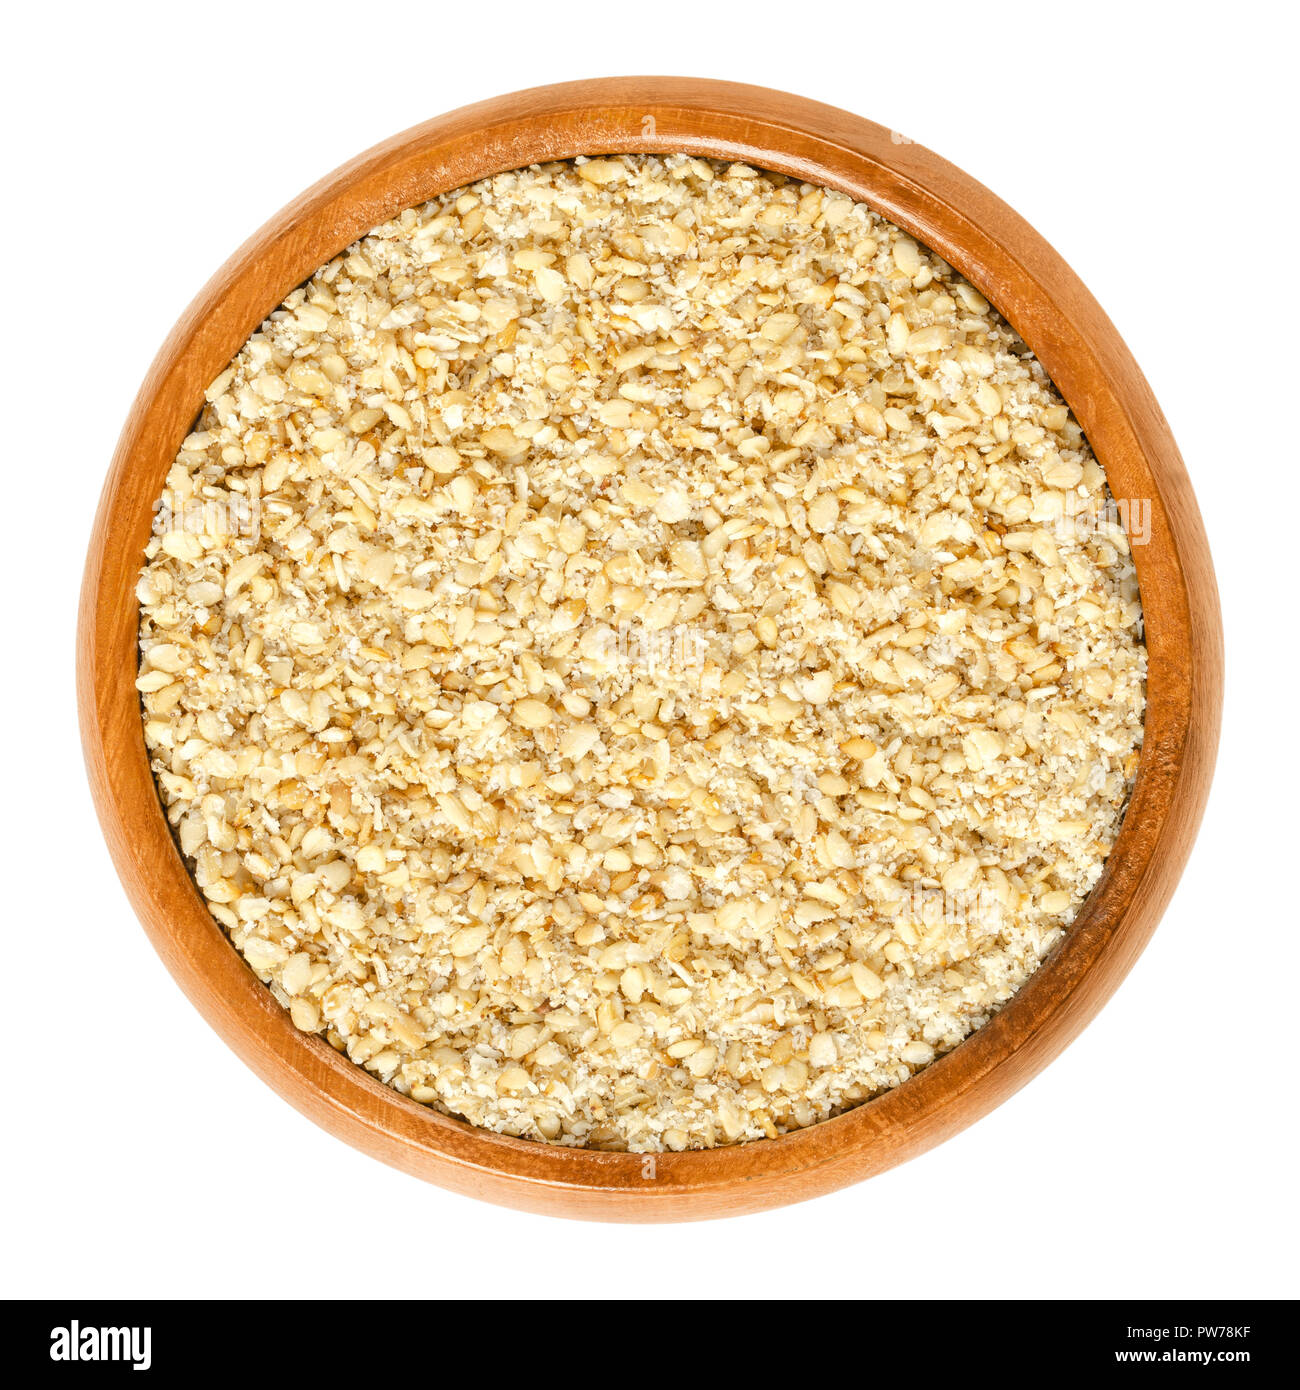 Gomashio in wooden bowl, also called gomasio. Dry condiment, made of toasted sesame seeds and salt, used in Japanese cuisine to sprinkle it over rice. Stock Photo